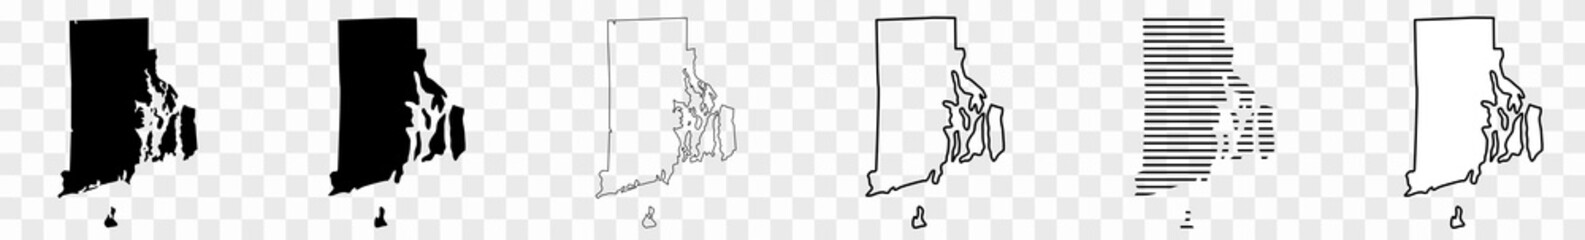 Rhode Island Map Black | State Border | United States | US America | Transparent Isolated | Variations